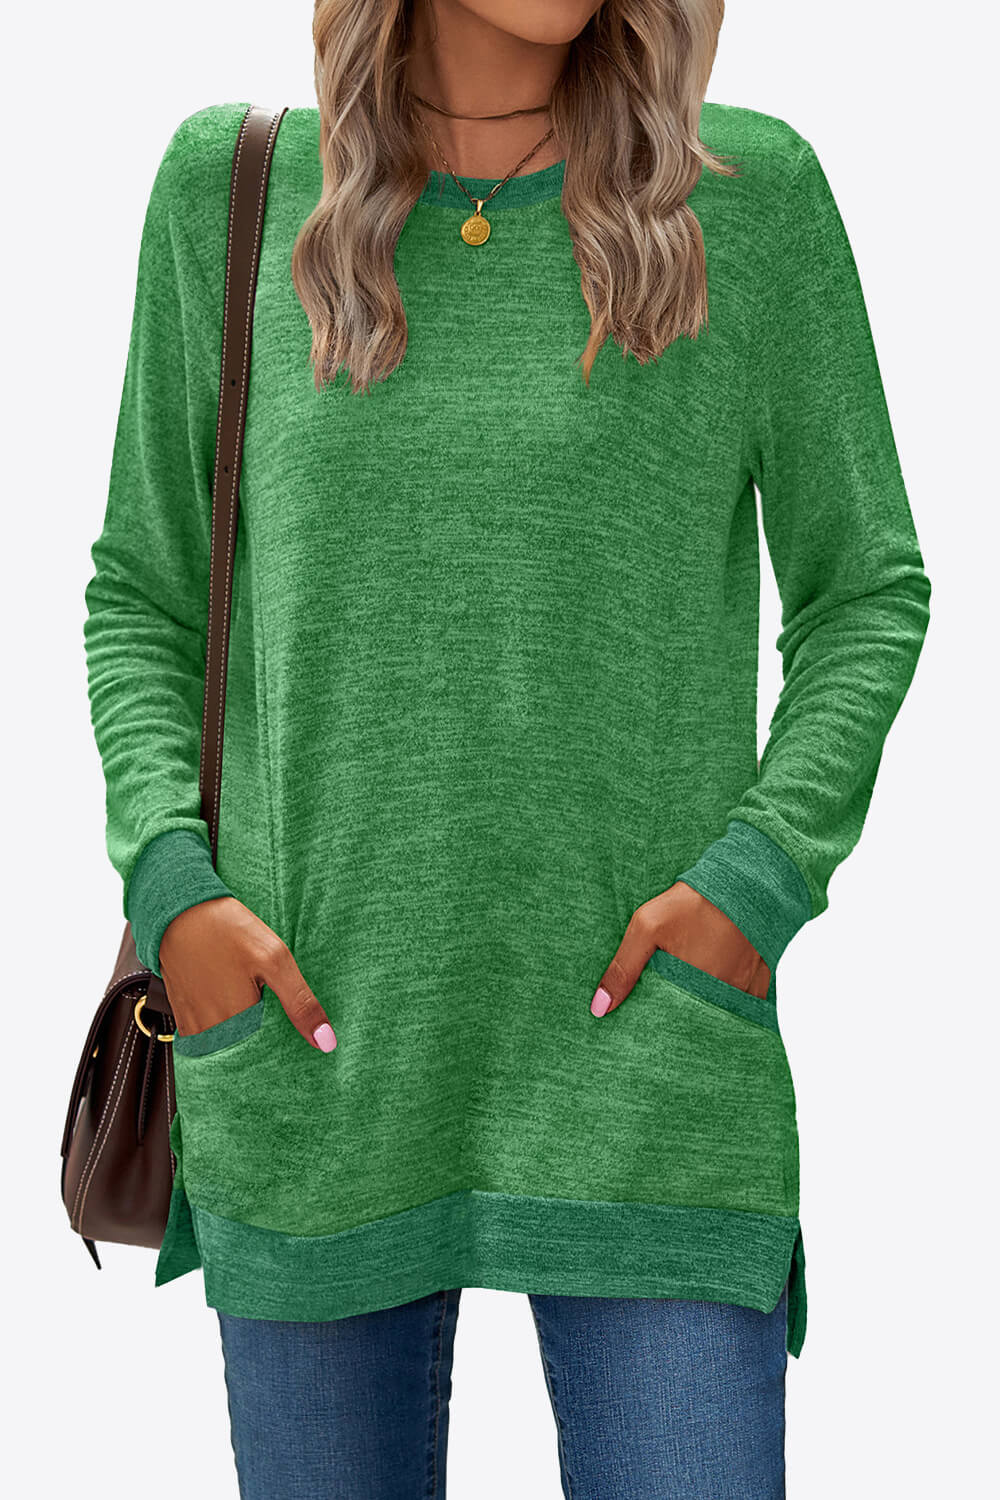 Heathered Slit Top with Pockets - Green / S - T-Shirts - Shirts & Tops - 13 - 2024